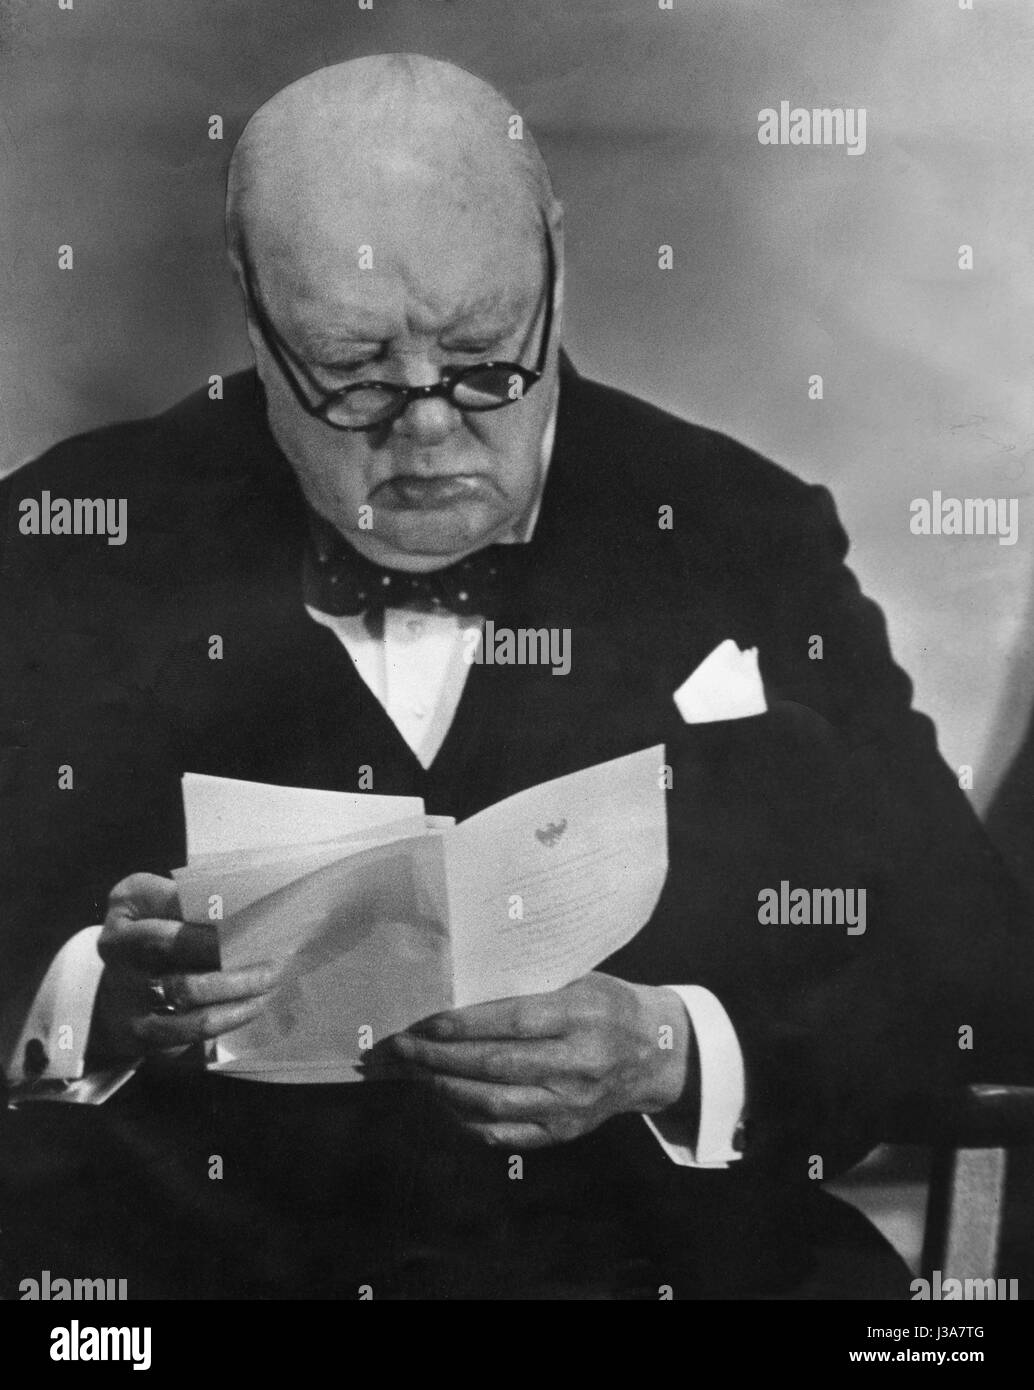 Winston Churchill at the awarding of the Charlemagne Prize in Aachen, 1956 Stock Photo